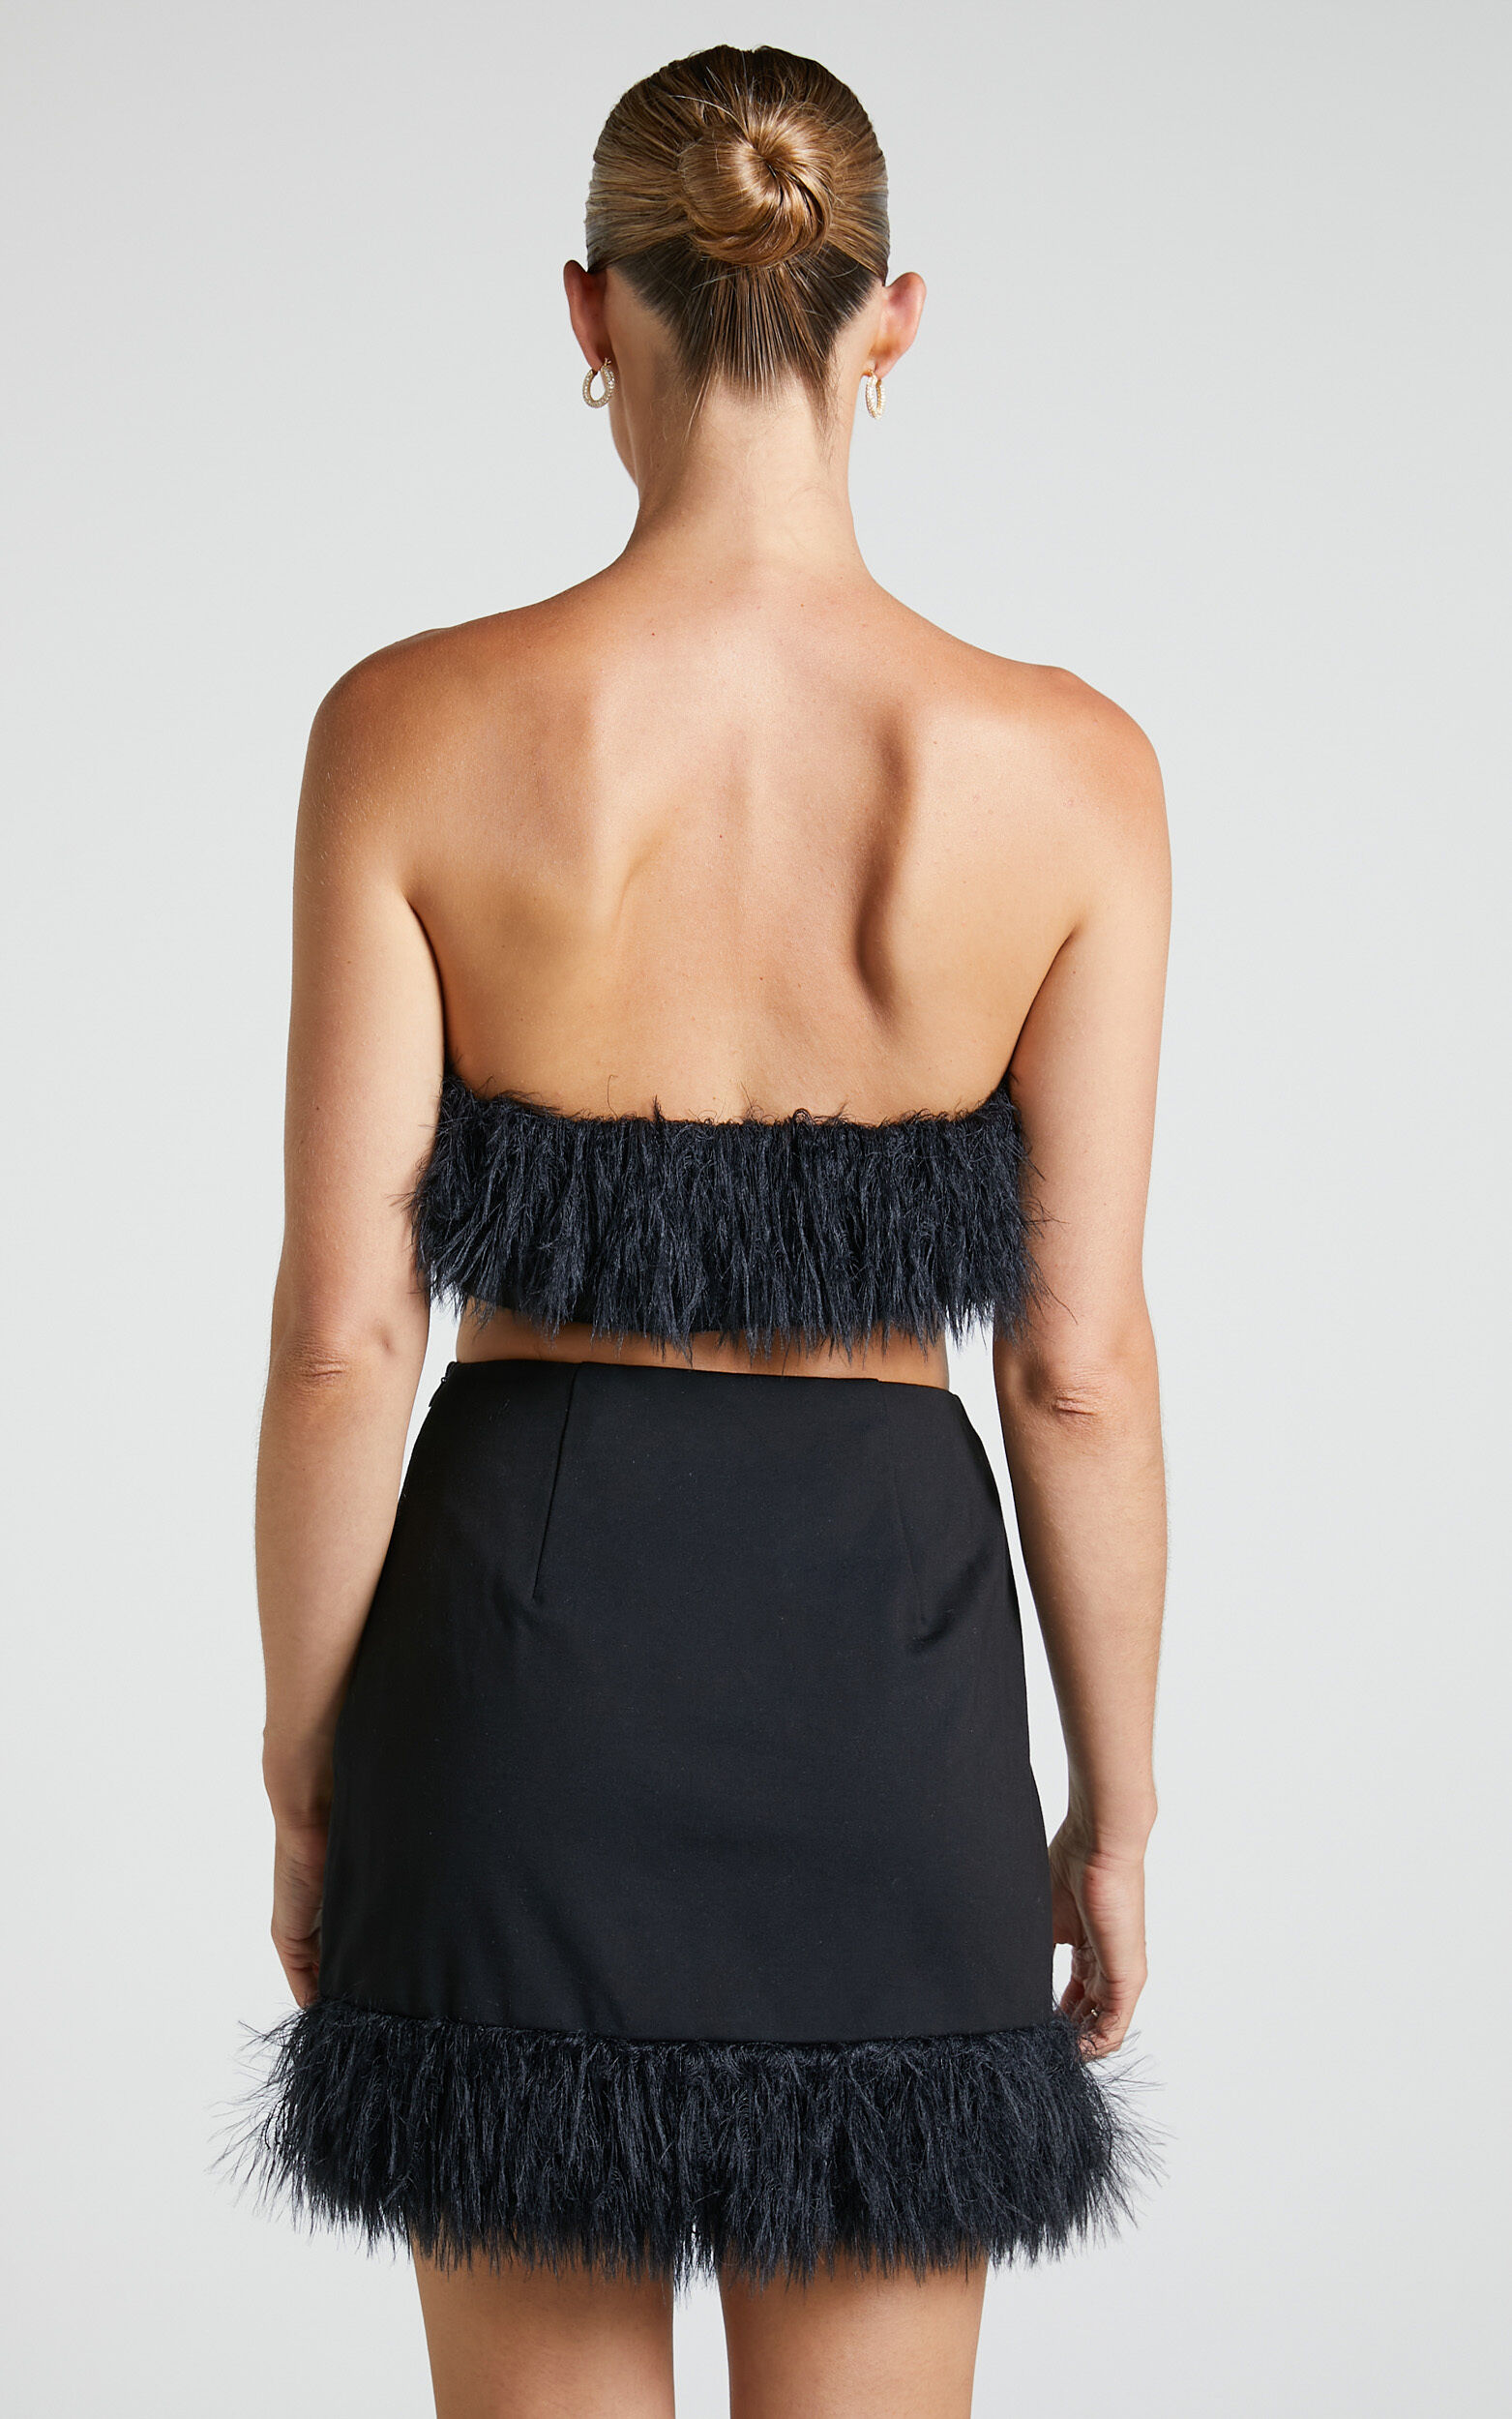 Ruffle My Feathers High Waisted Faux Feather Trim Mini Skirt